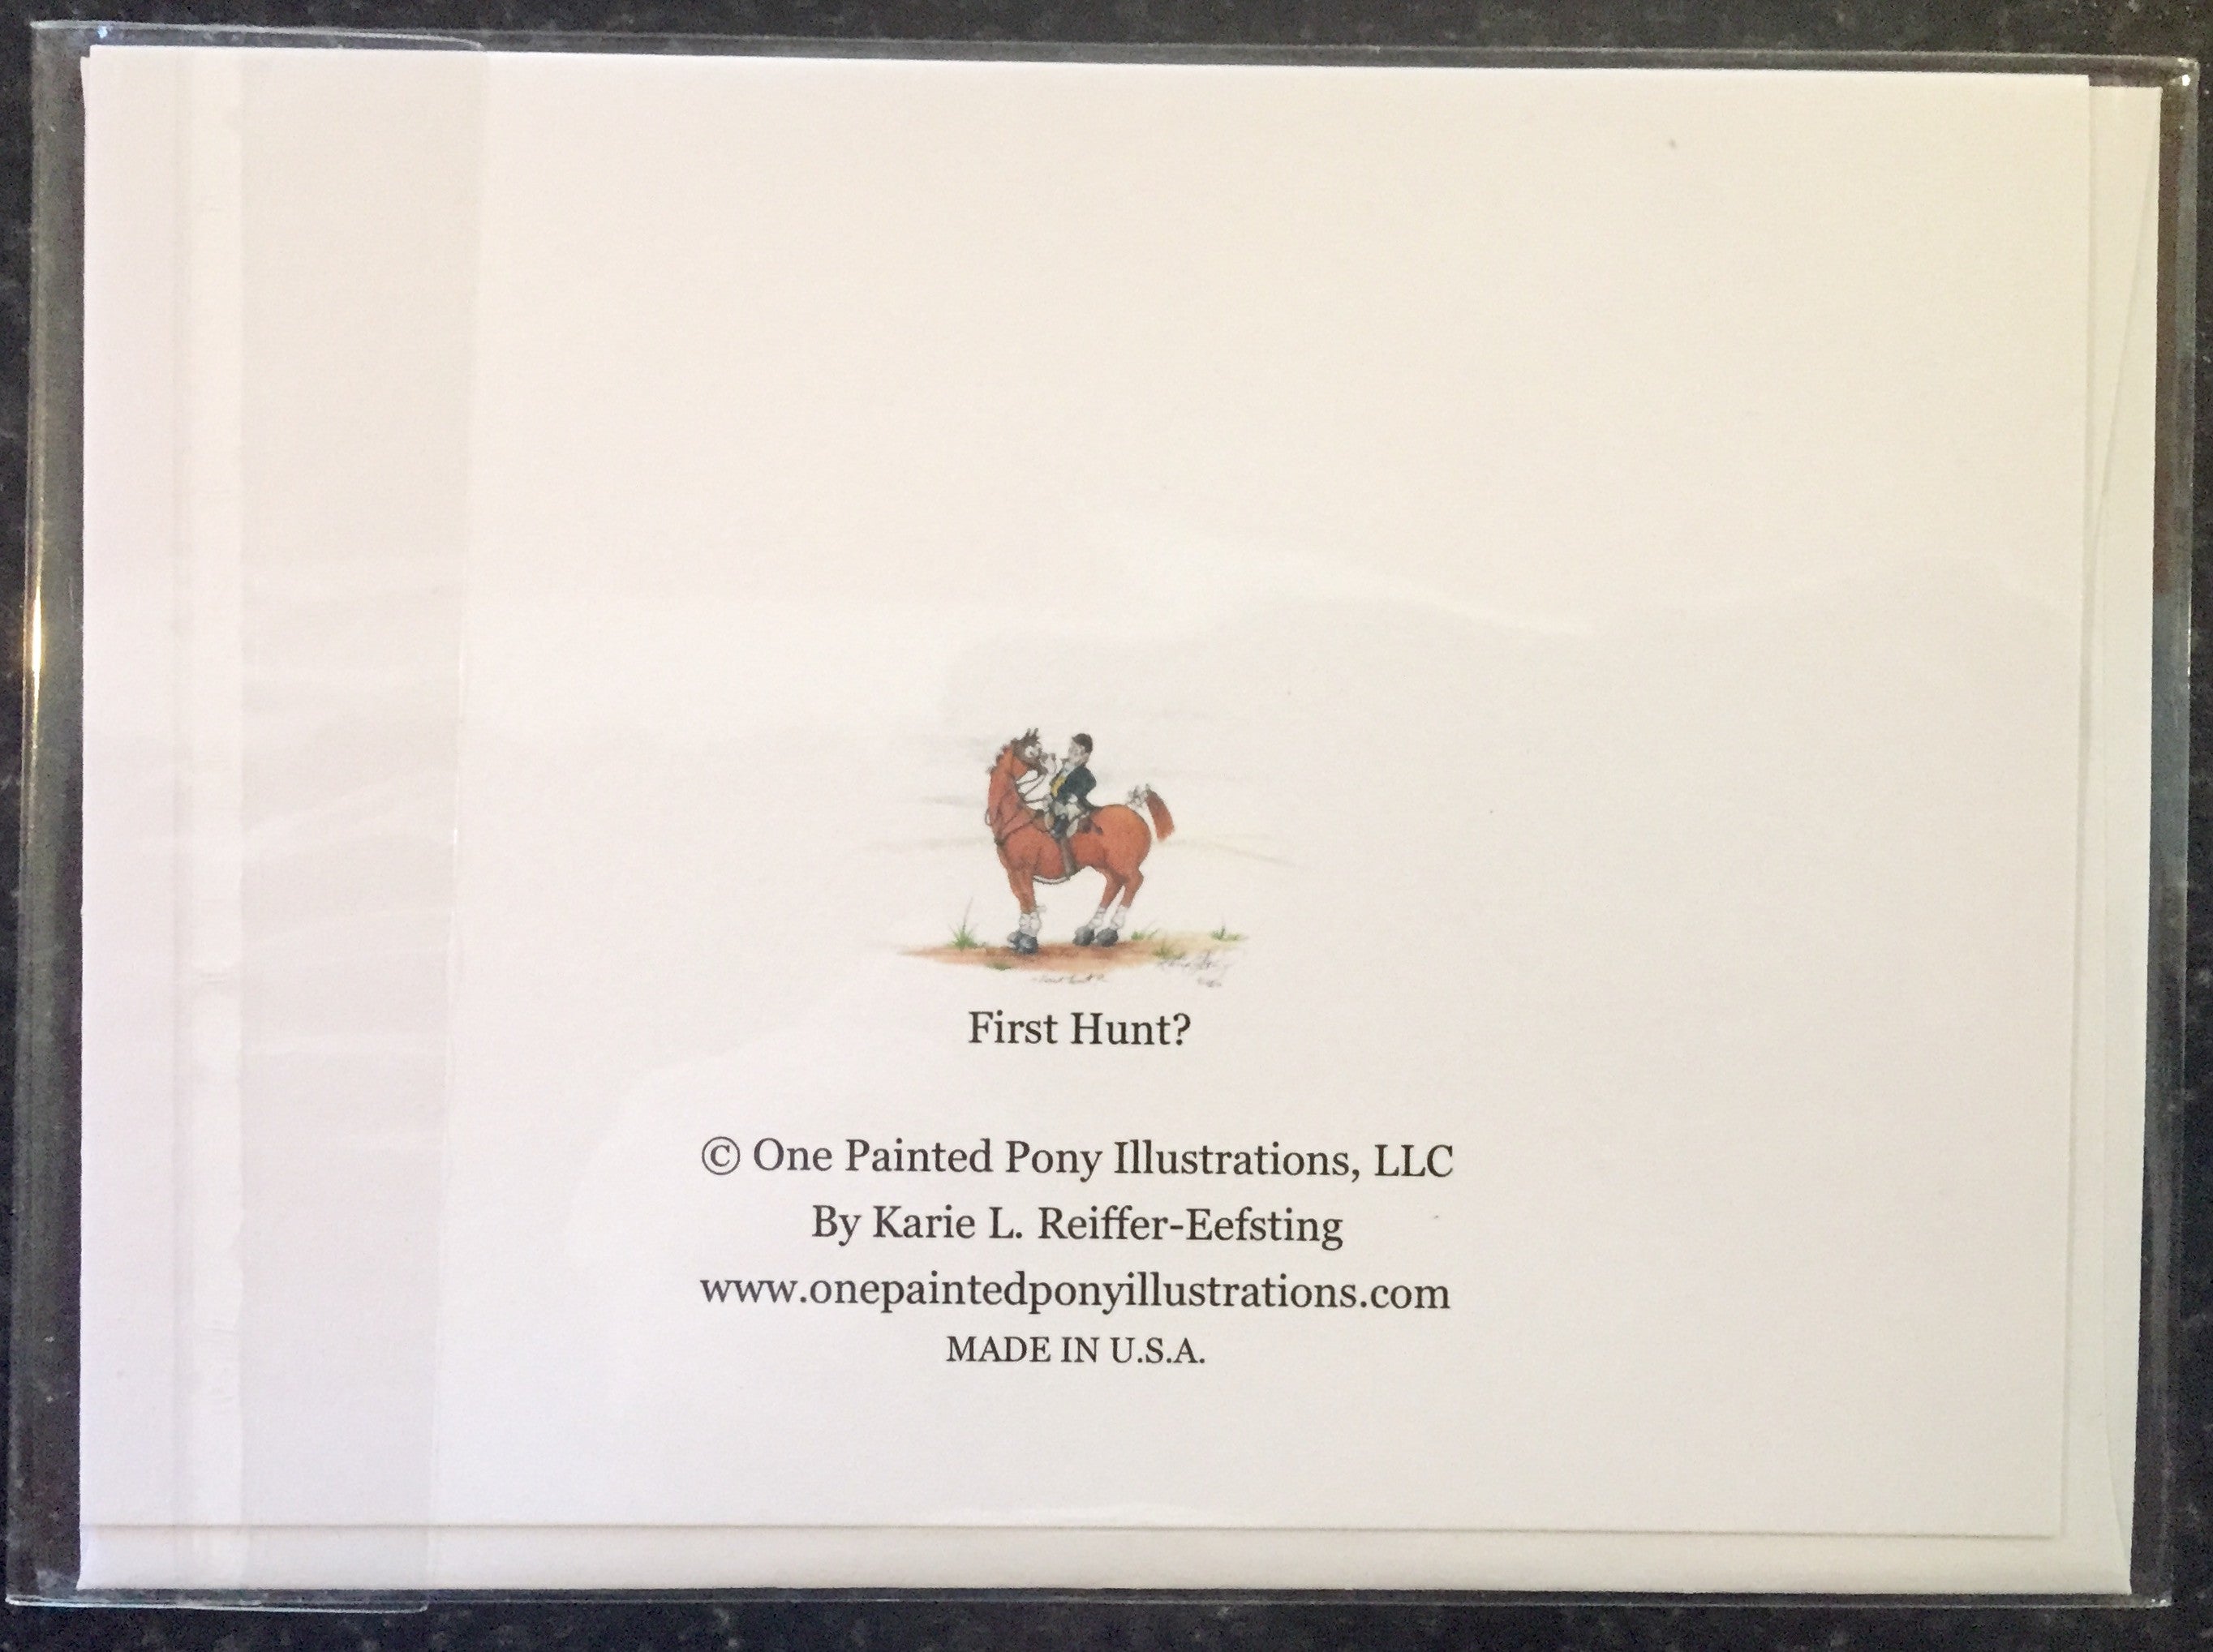 One Painted Pony Illustrations Gift Card "First Hunt?" - Horse & Hound Tack Shop & Pet Supply